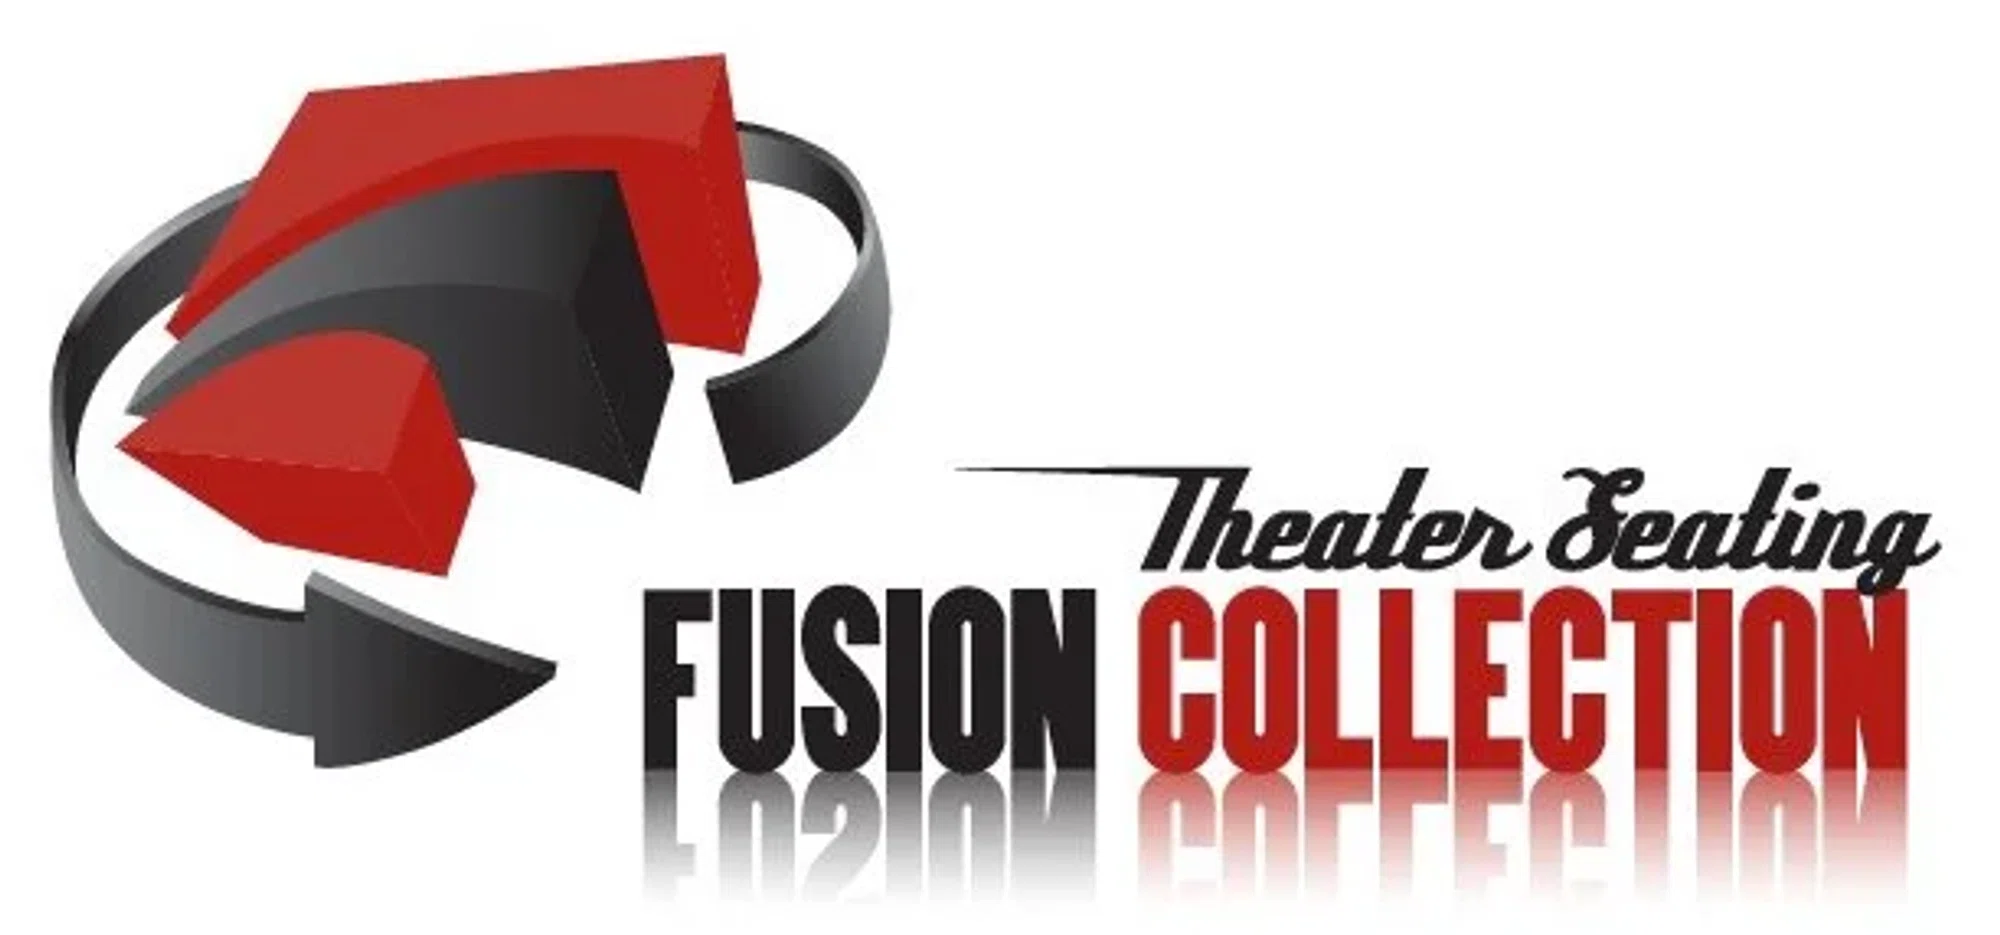 Fusion Collection Theater Seating